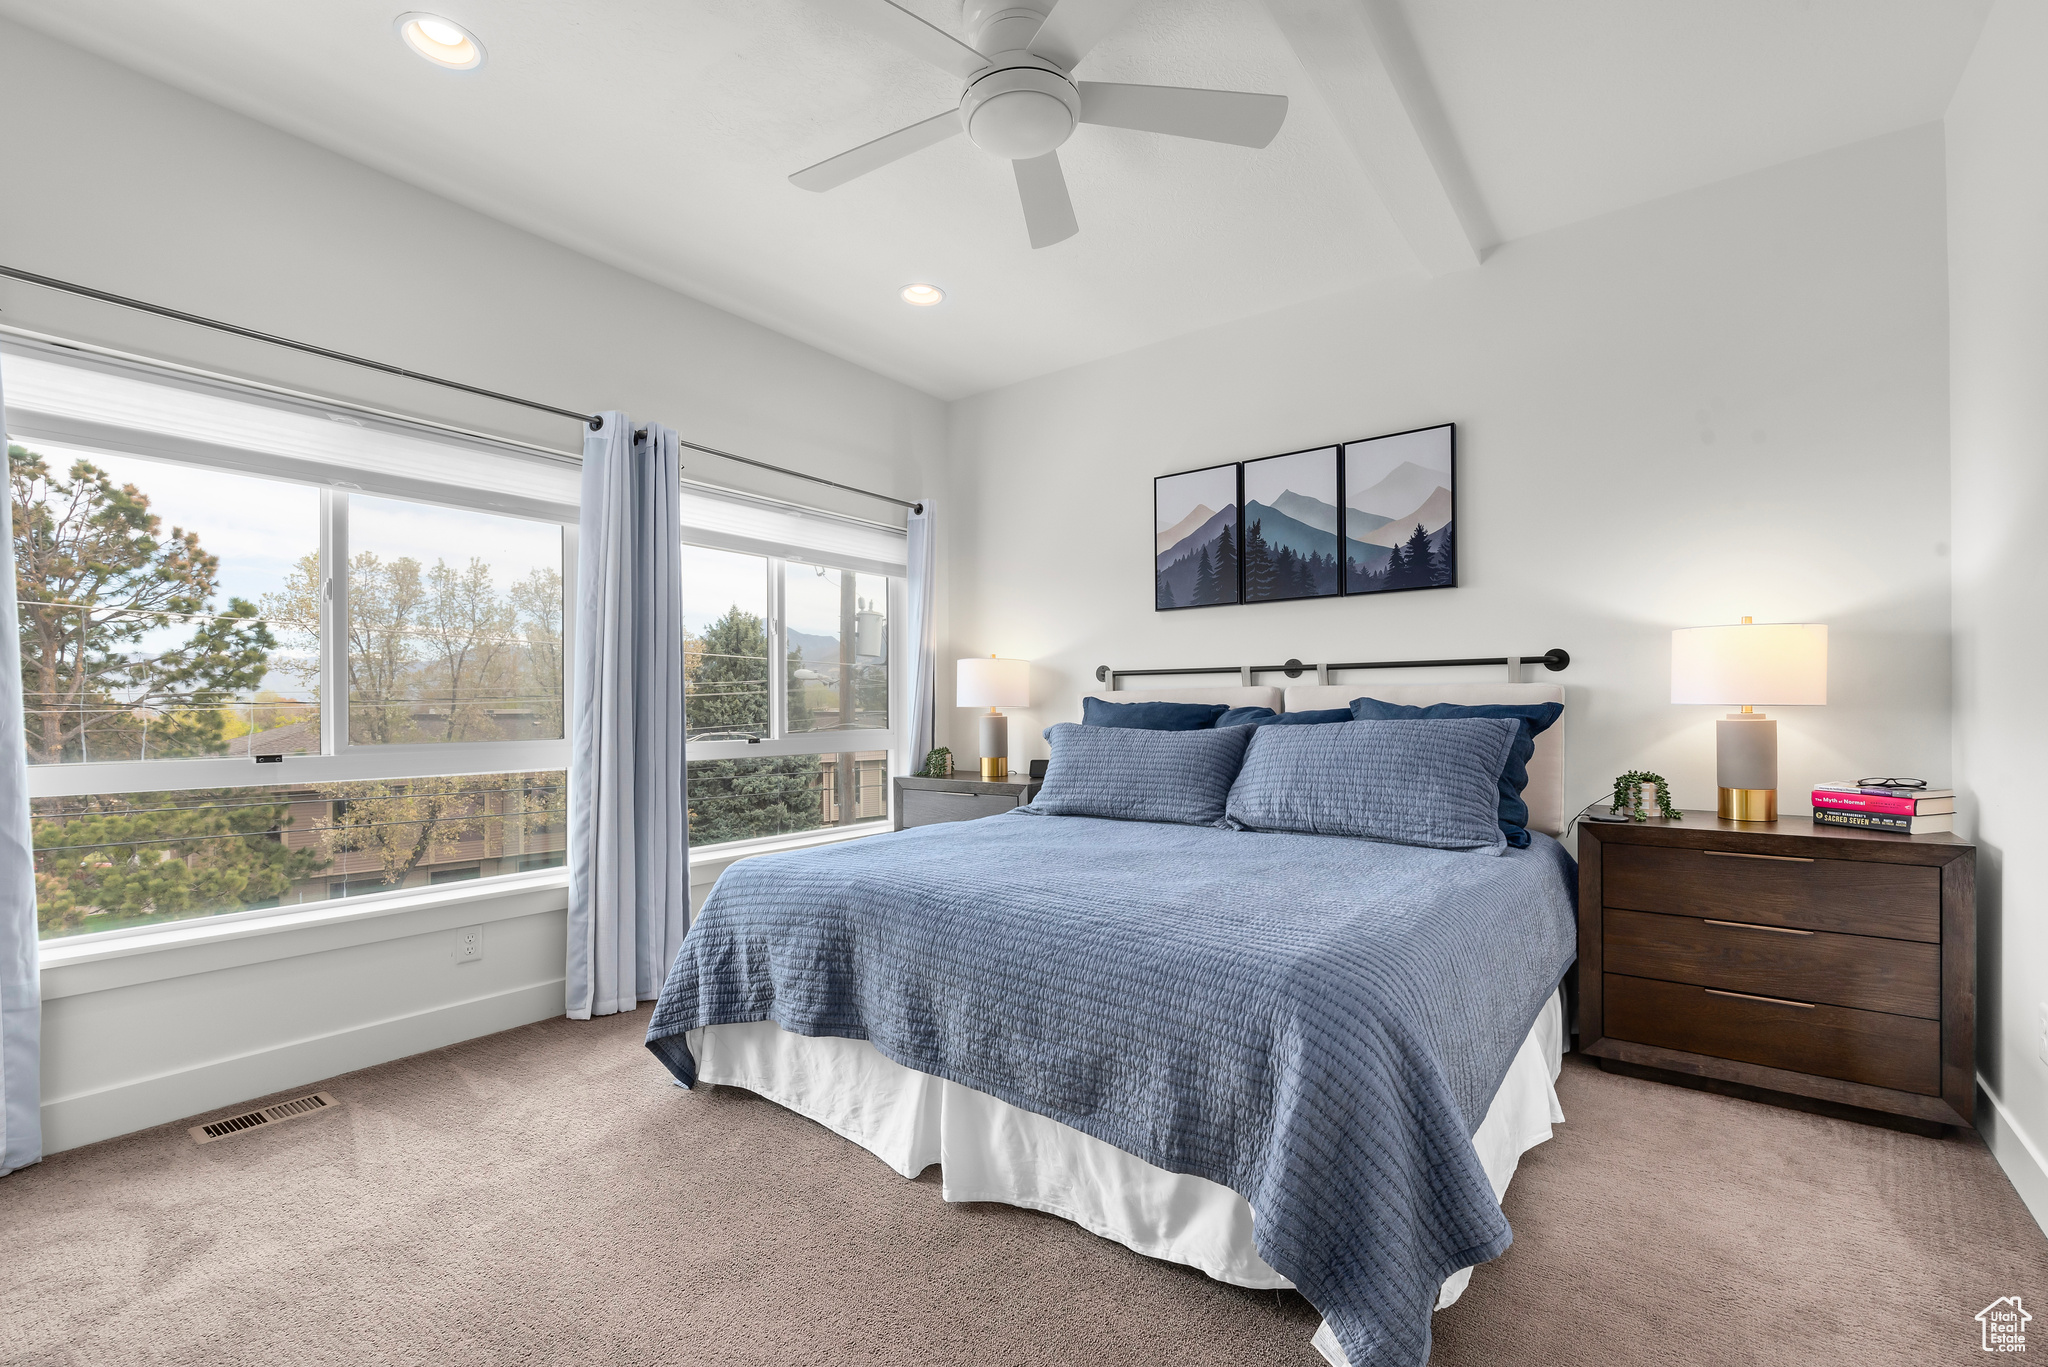 Owners bedroom featuring beam ceiling and ceiling fan